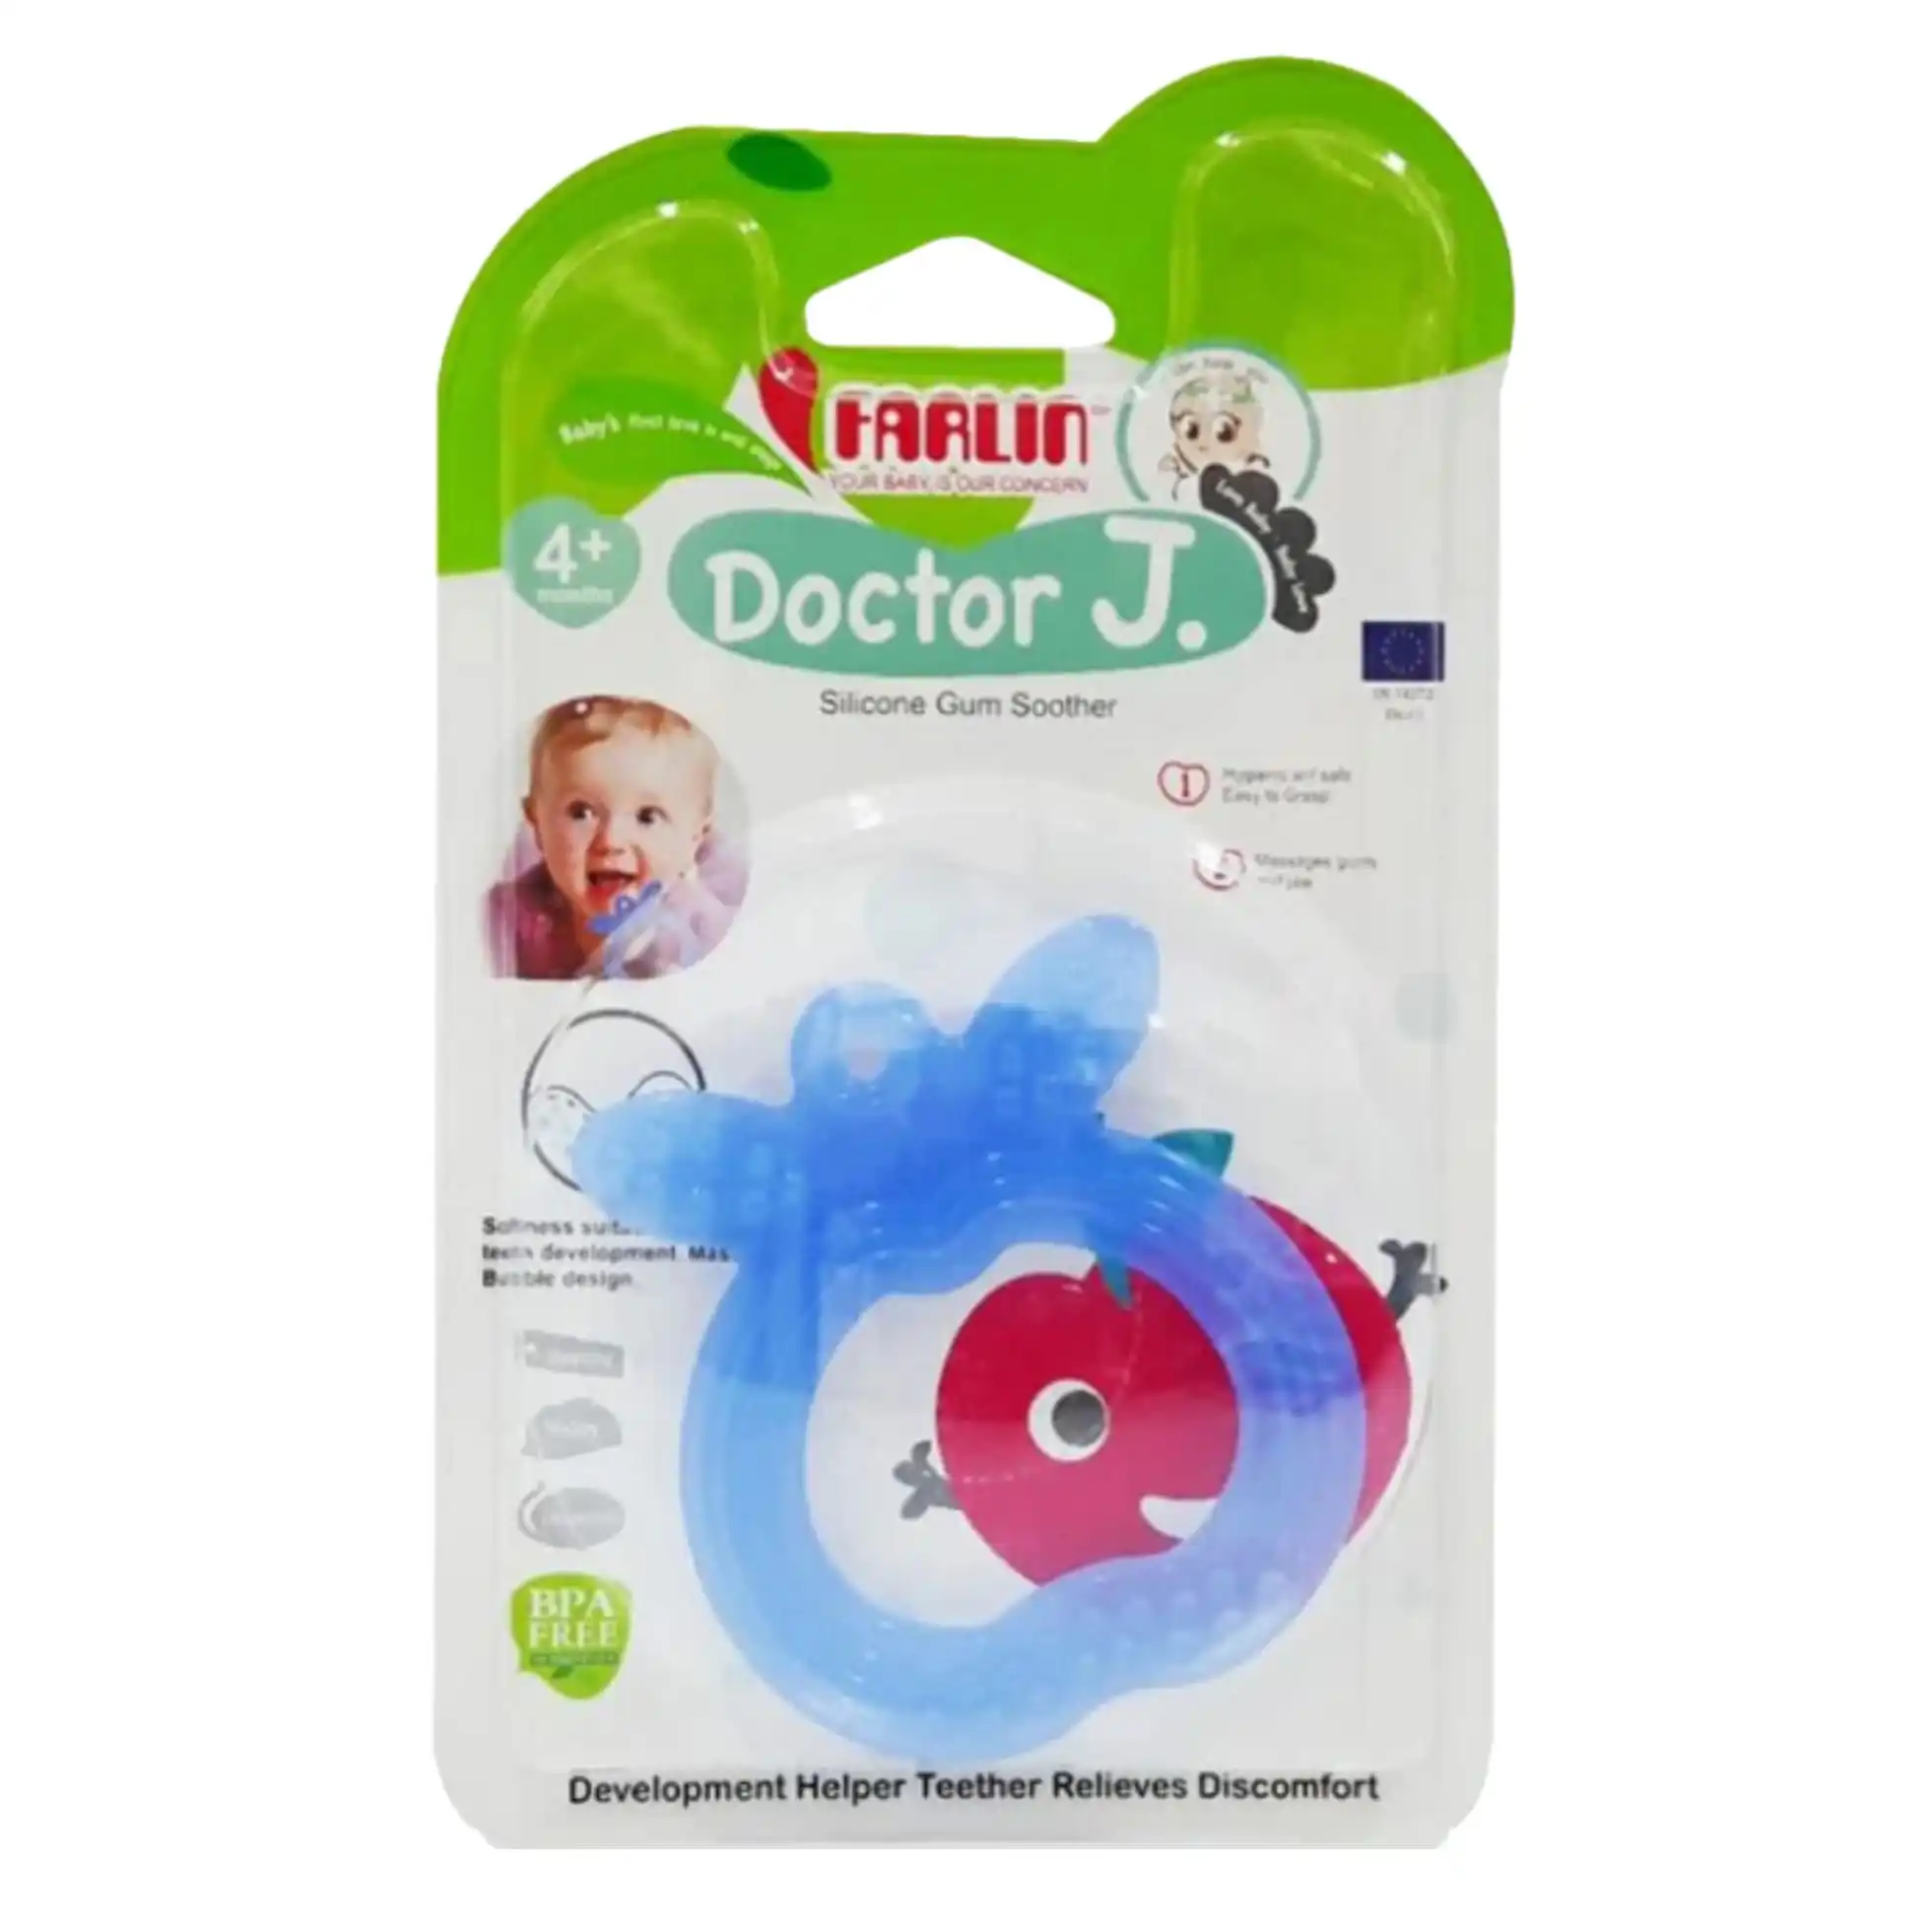 Gum silicone pacifier from Farlin, age 4 months